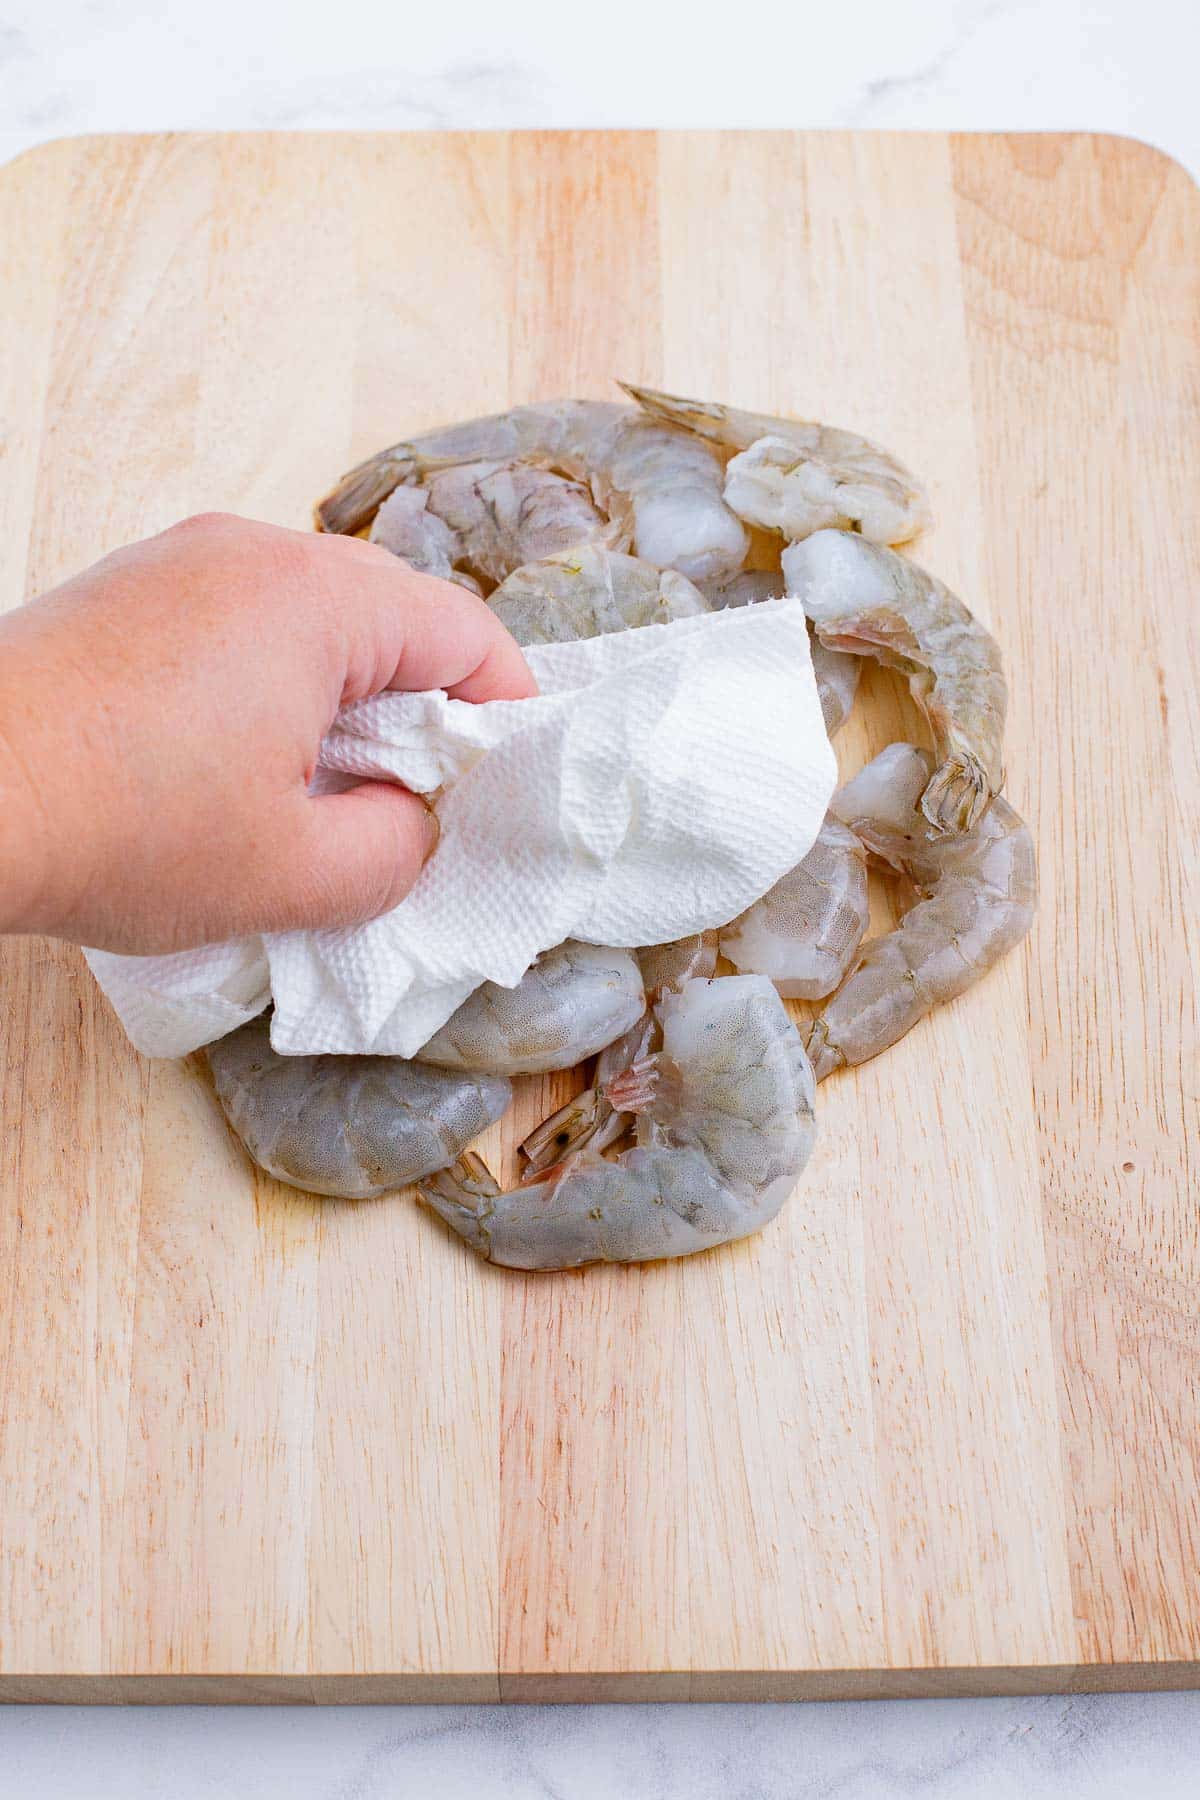 A hand pats the shrimp dry.